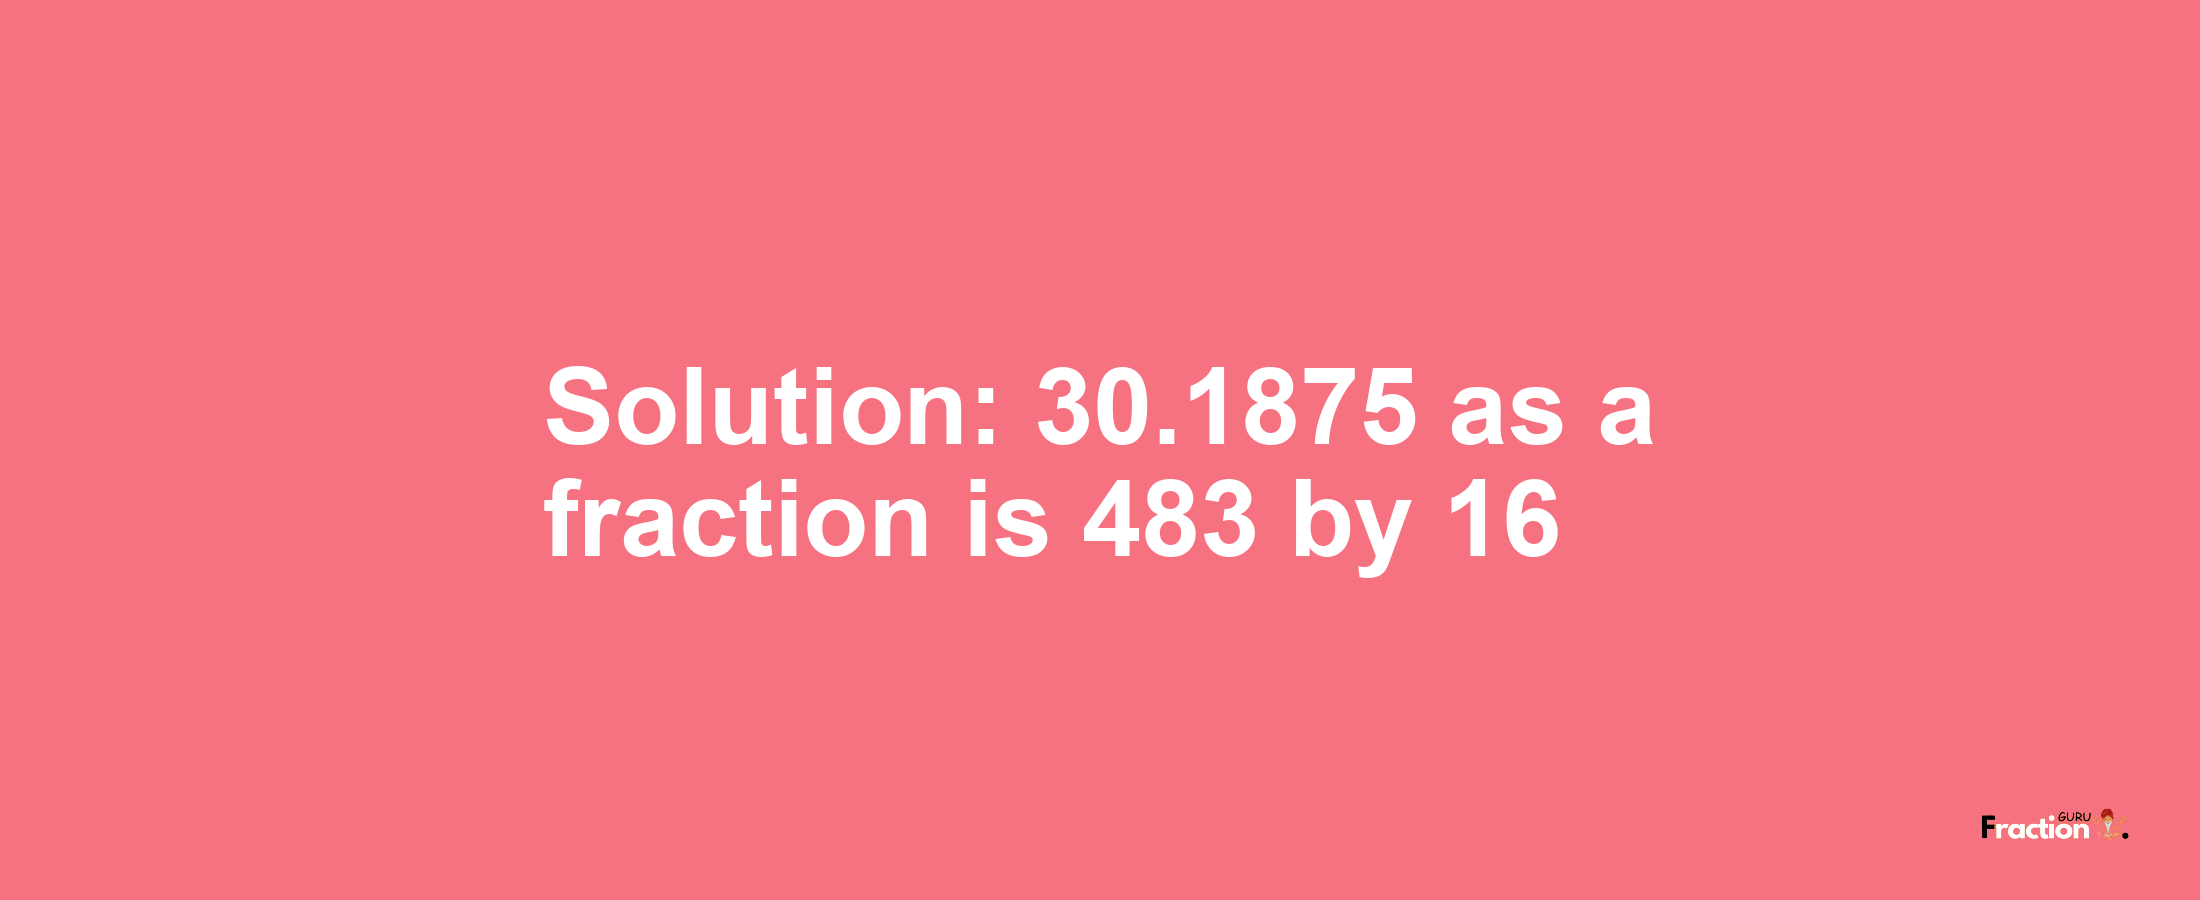 Solution:30.1875 as a fraction is 483/16